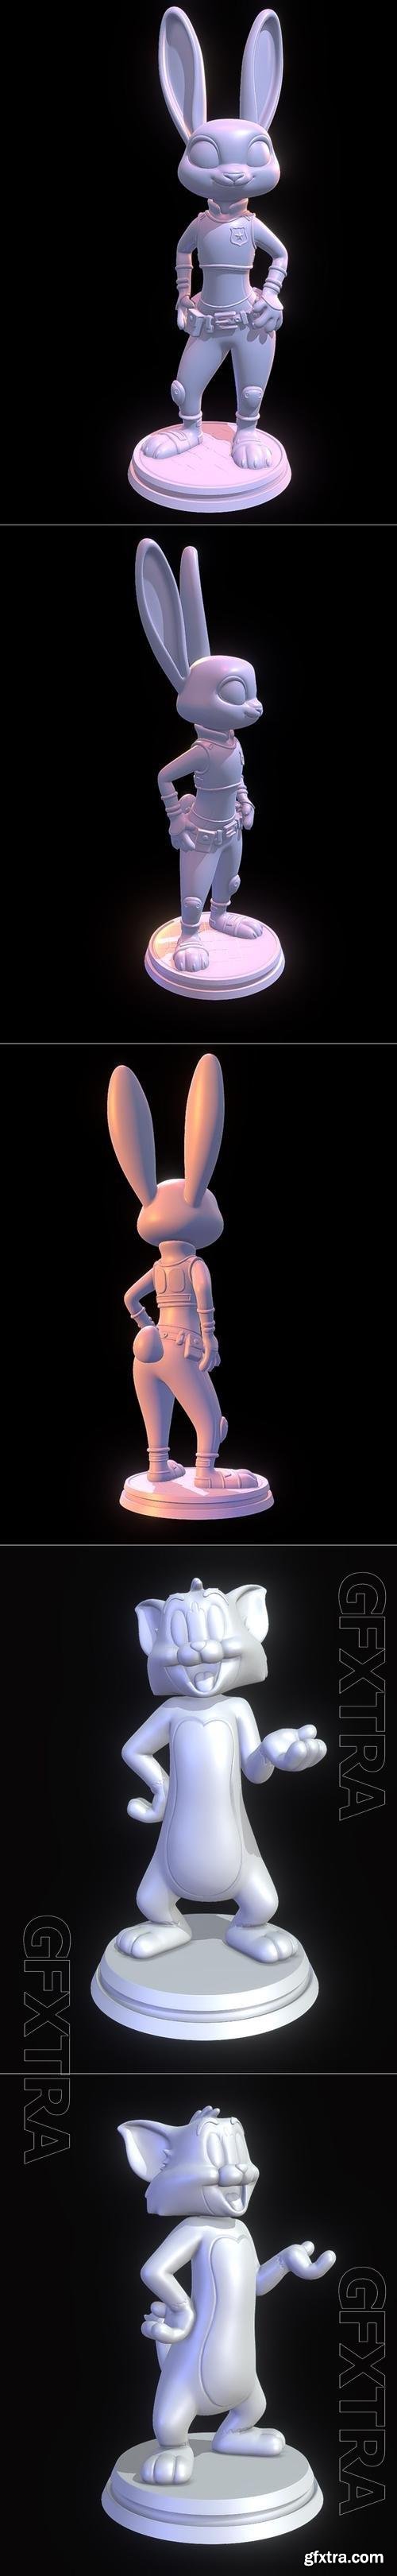 Judy Hopps - Zootopia and Tom - Tom and Jerry 3D Print